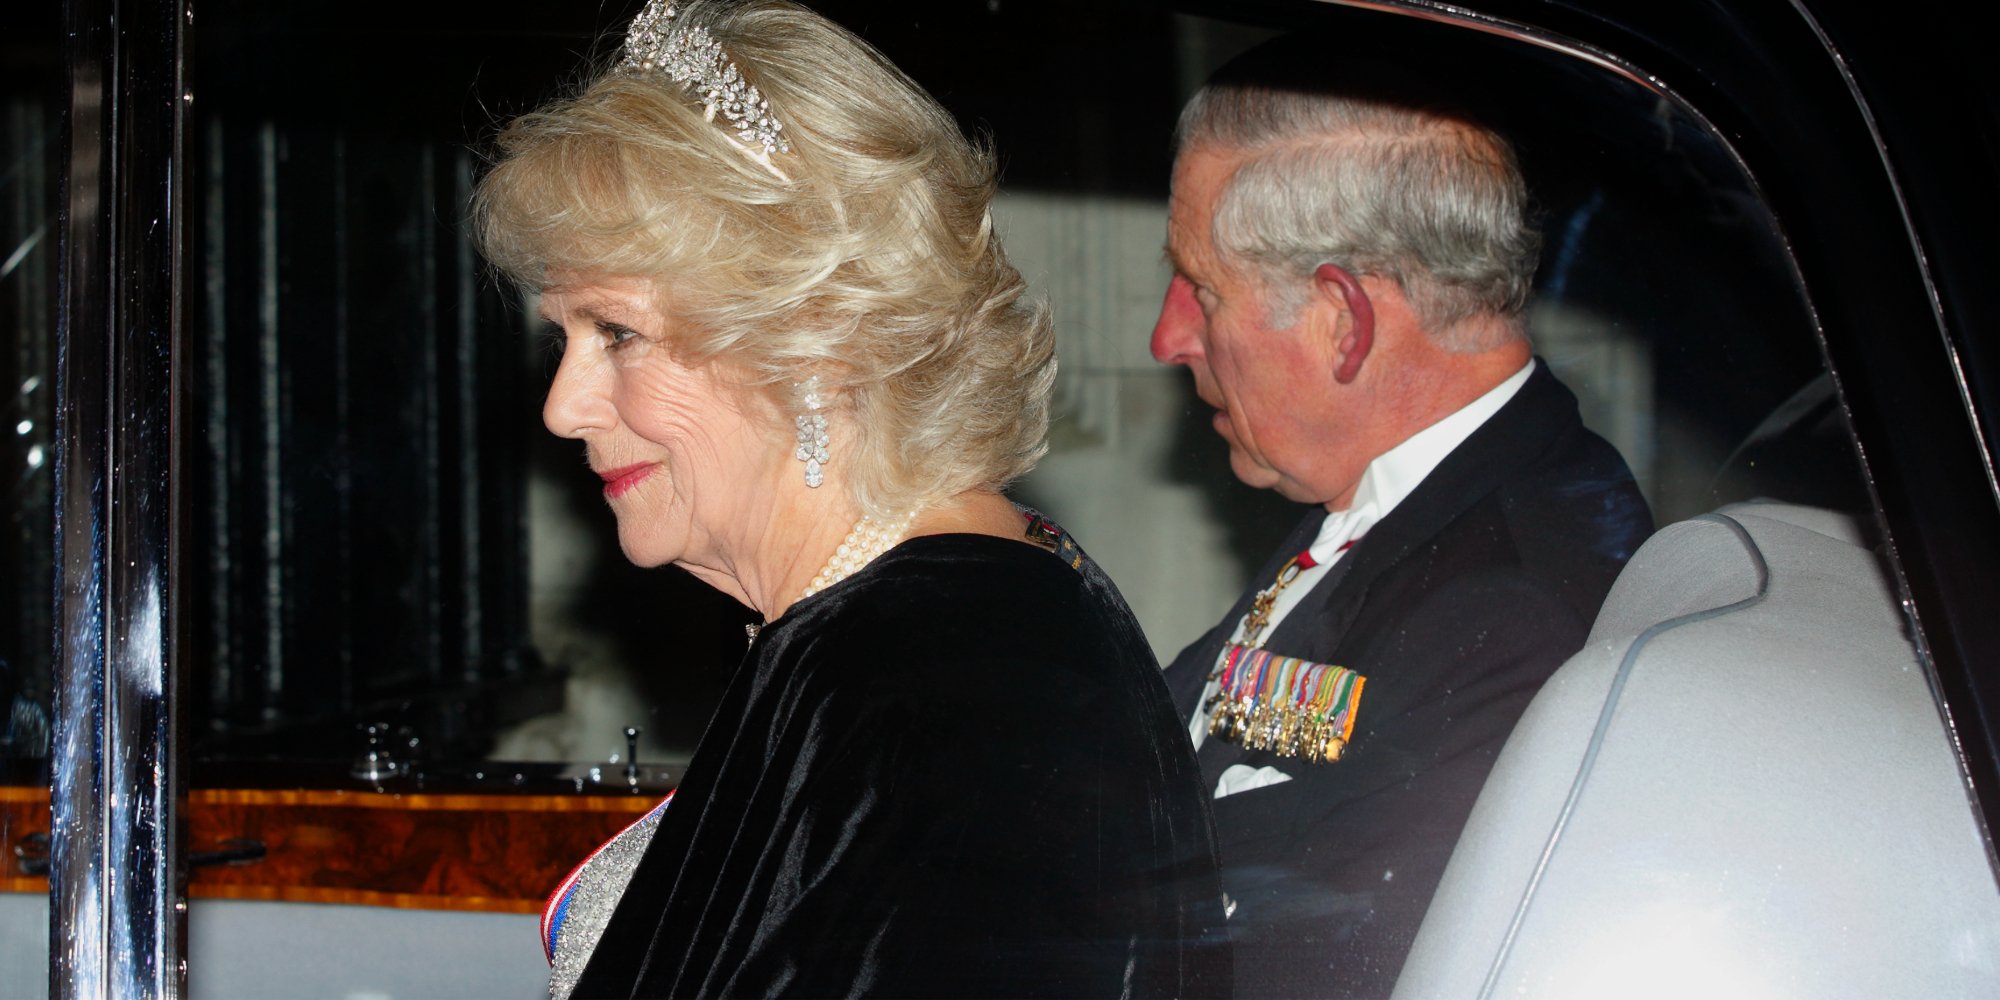 Camilla Parker Bowles and Prince Charles arrive at Buckingham Palace to attend a reception hosted by Queen Elizabeth II for Members of the Diplomatic Corps on December 2, 2014 in London, England.